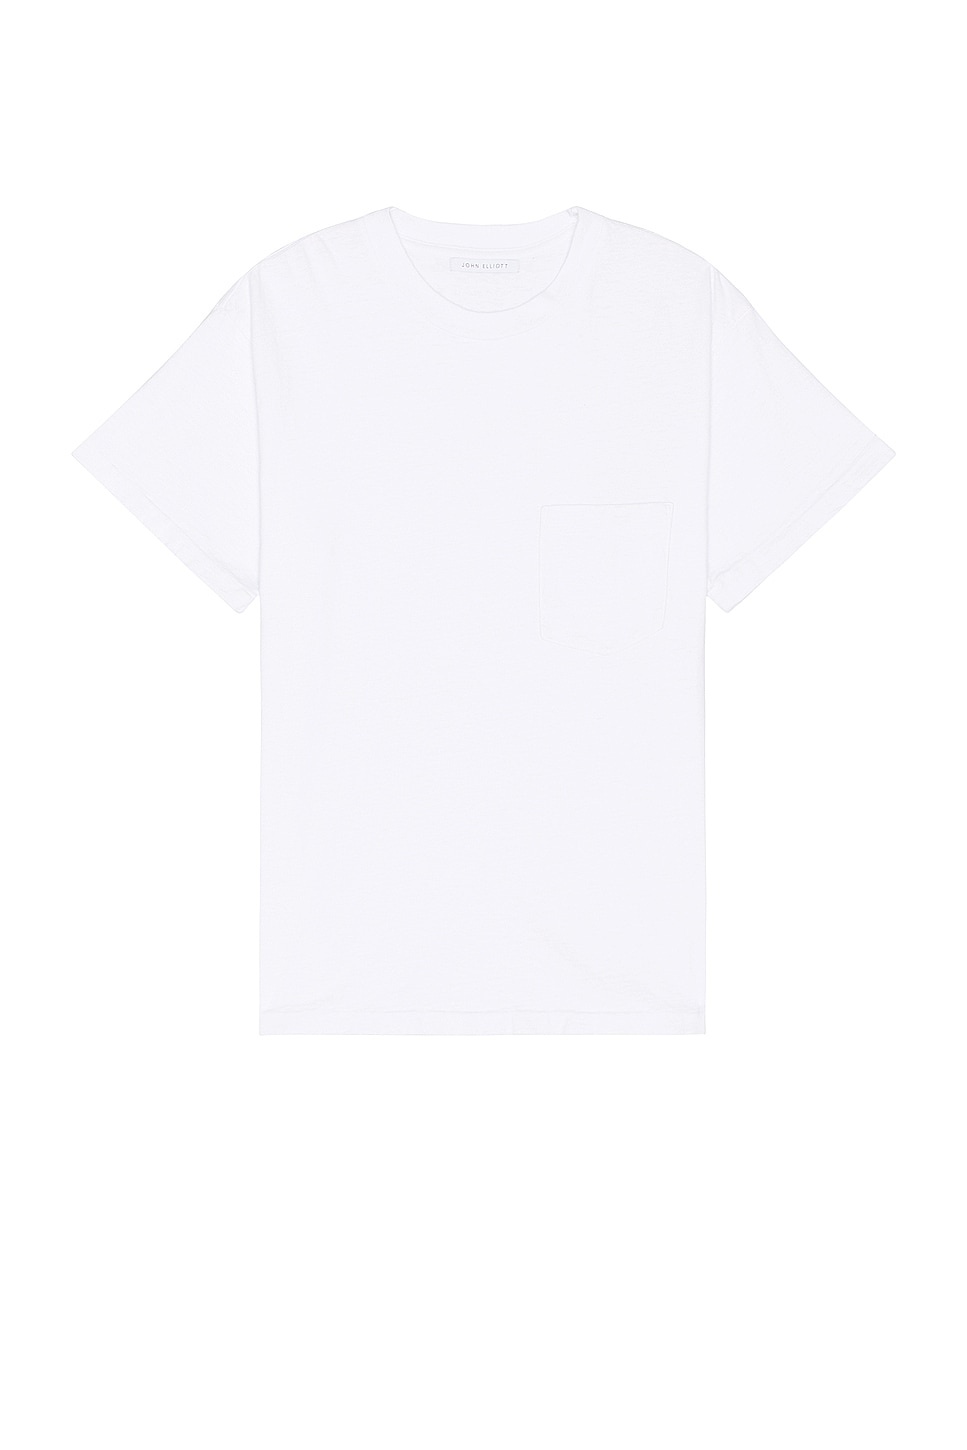 Cropped Campus Pocket Tee - 1